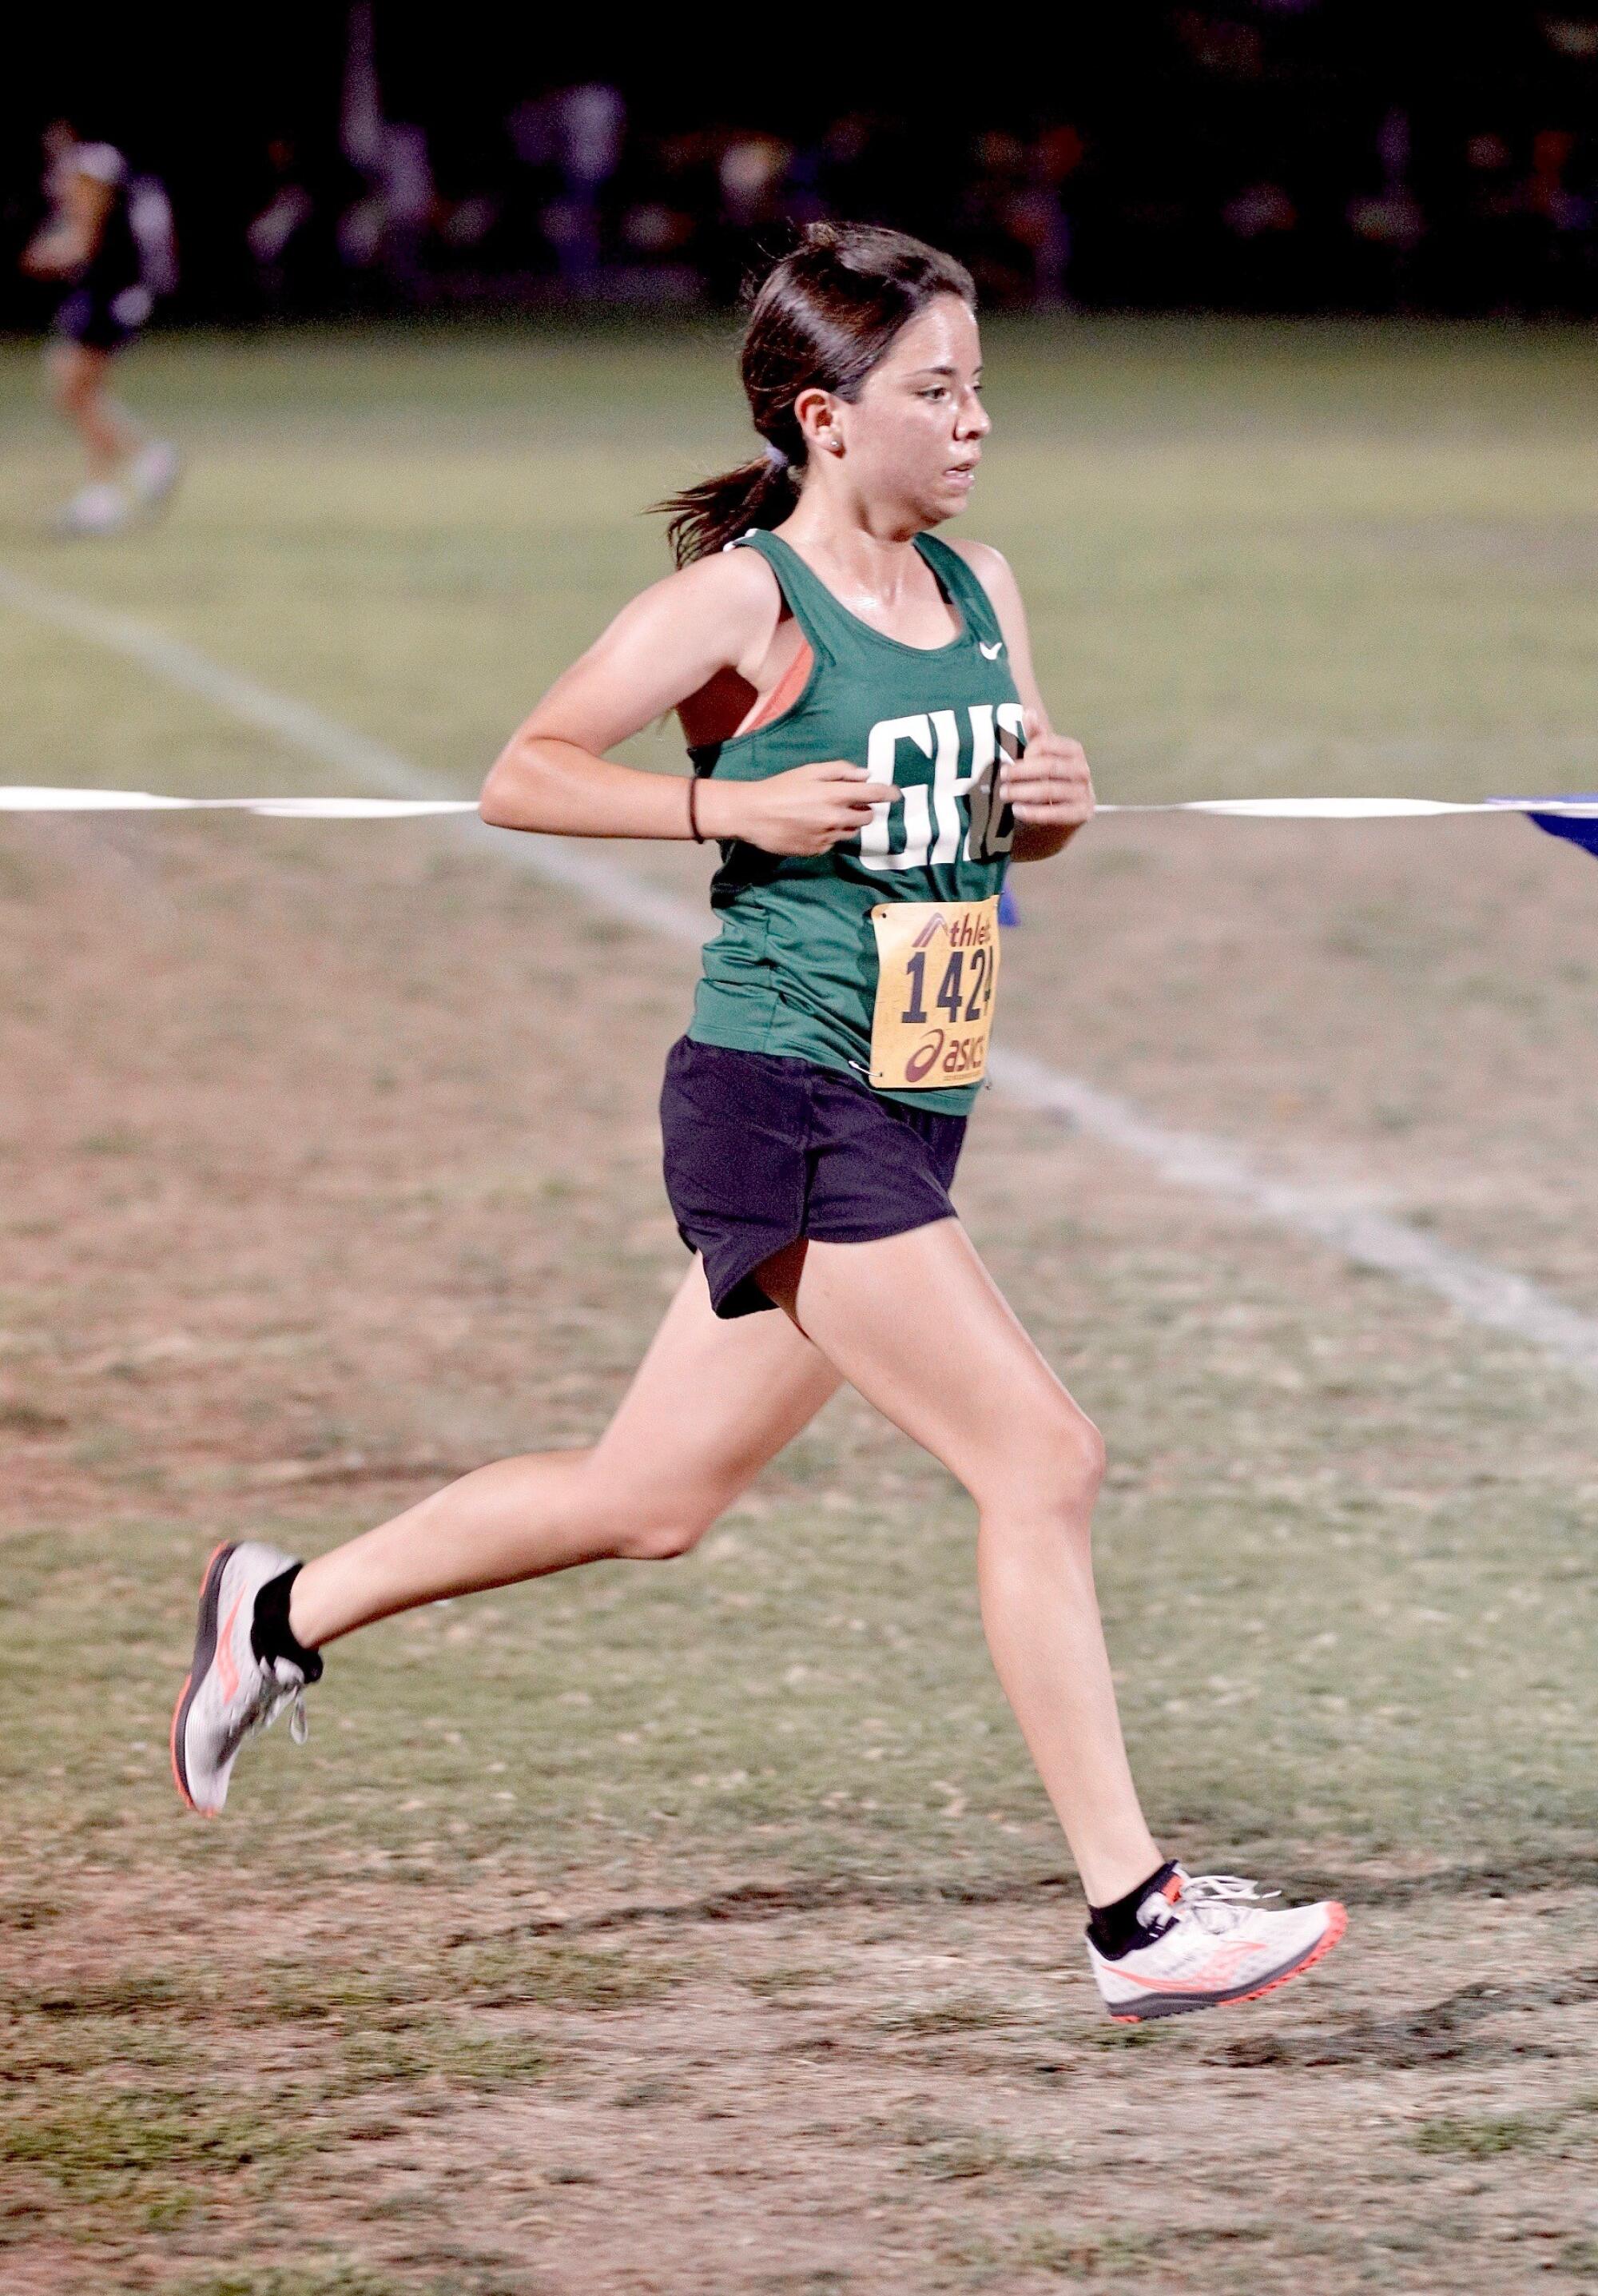 Granada Hills sophomore Samantha Pacheco on her way to winning the Blue varsity girls B race at Great Park in Irvine.